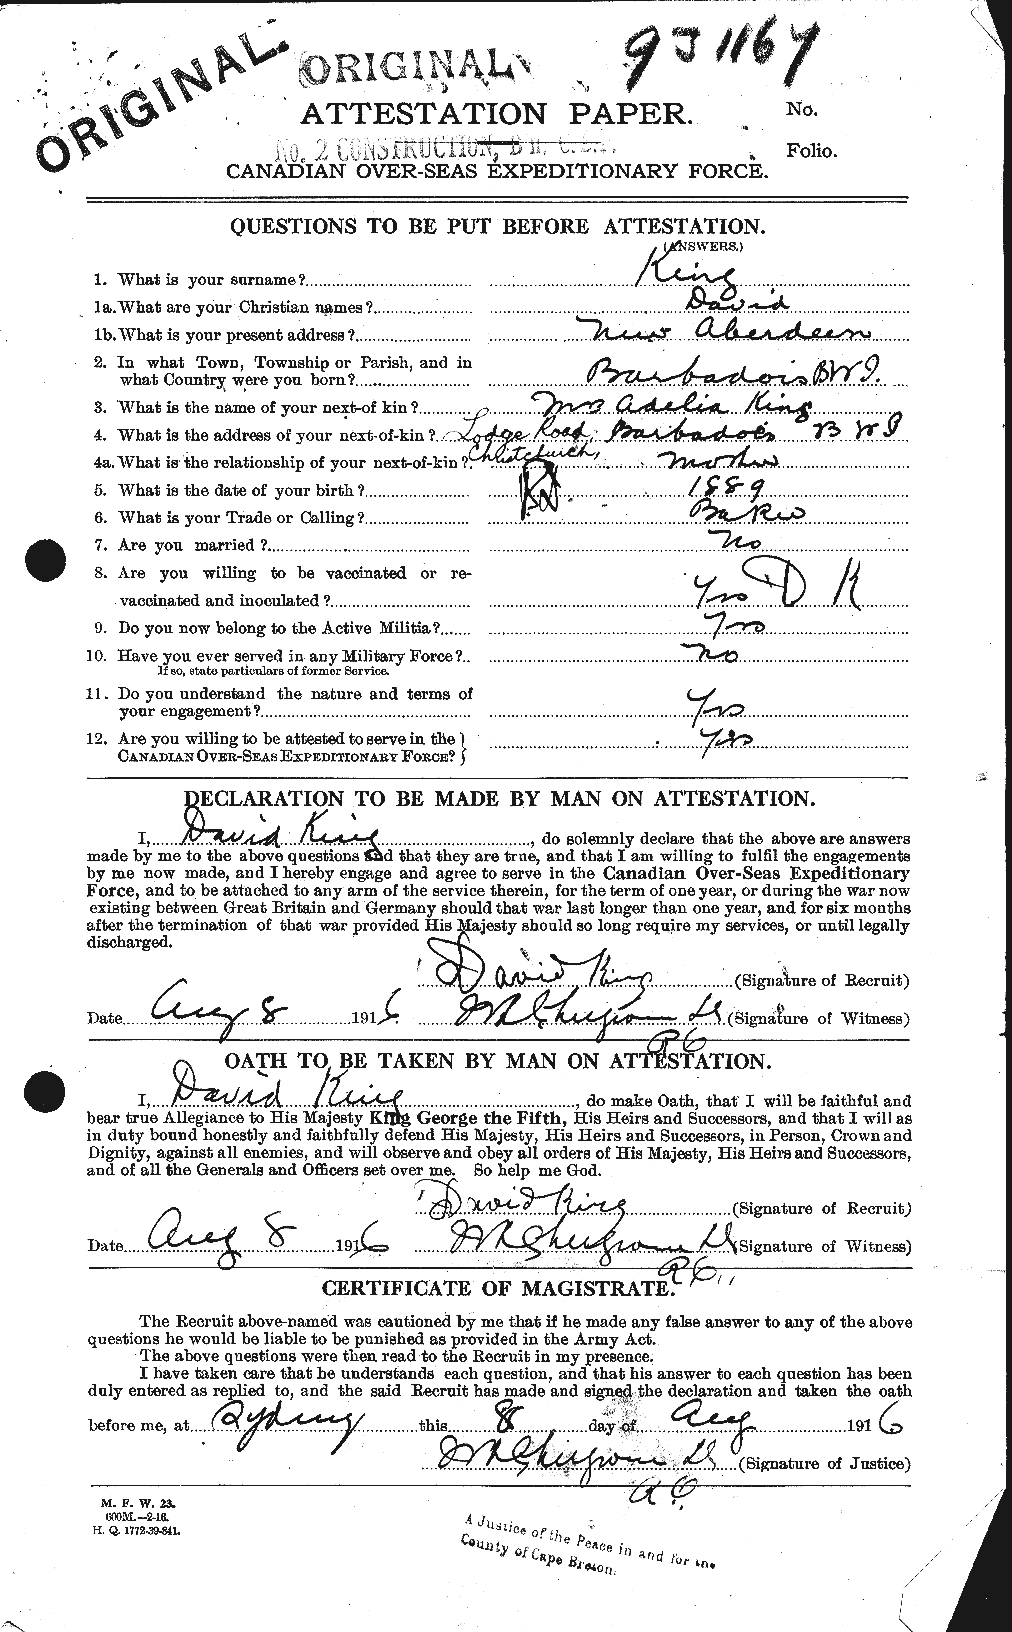 Personnel Records of the First World War - CEF 437827a